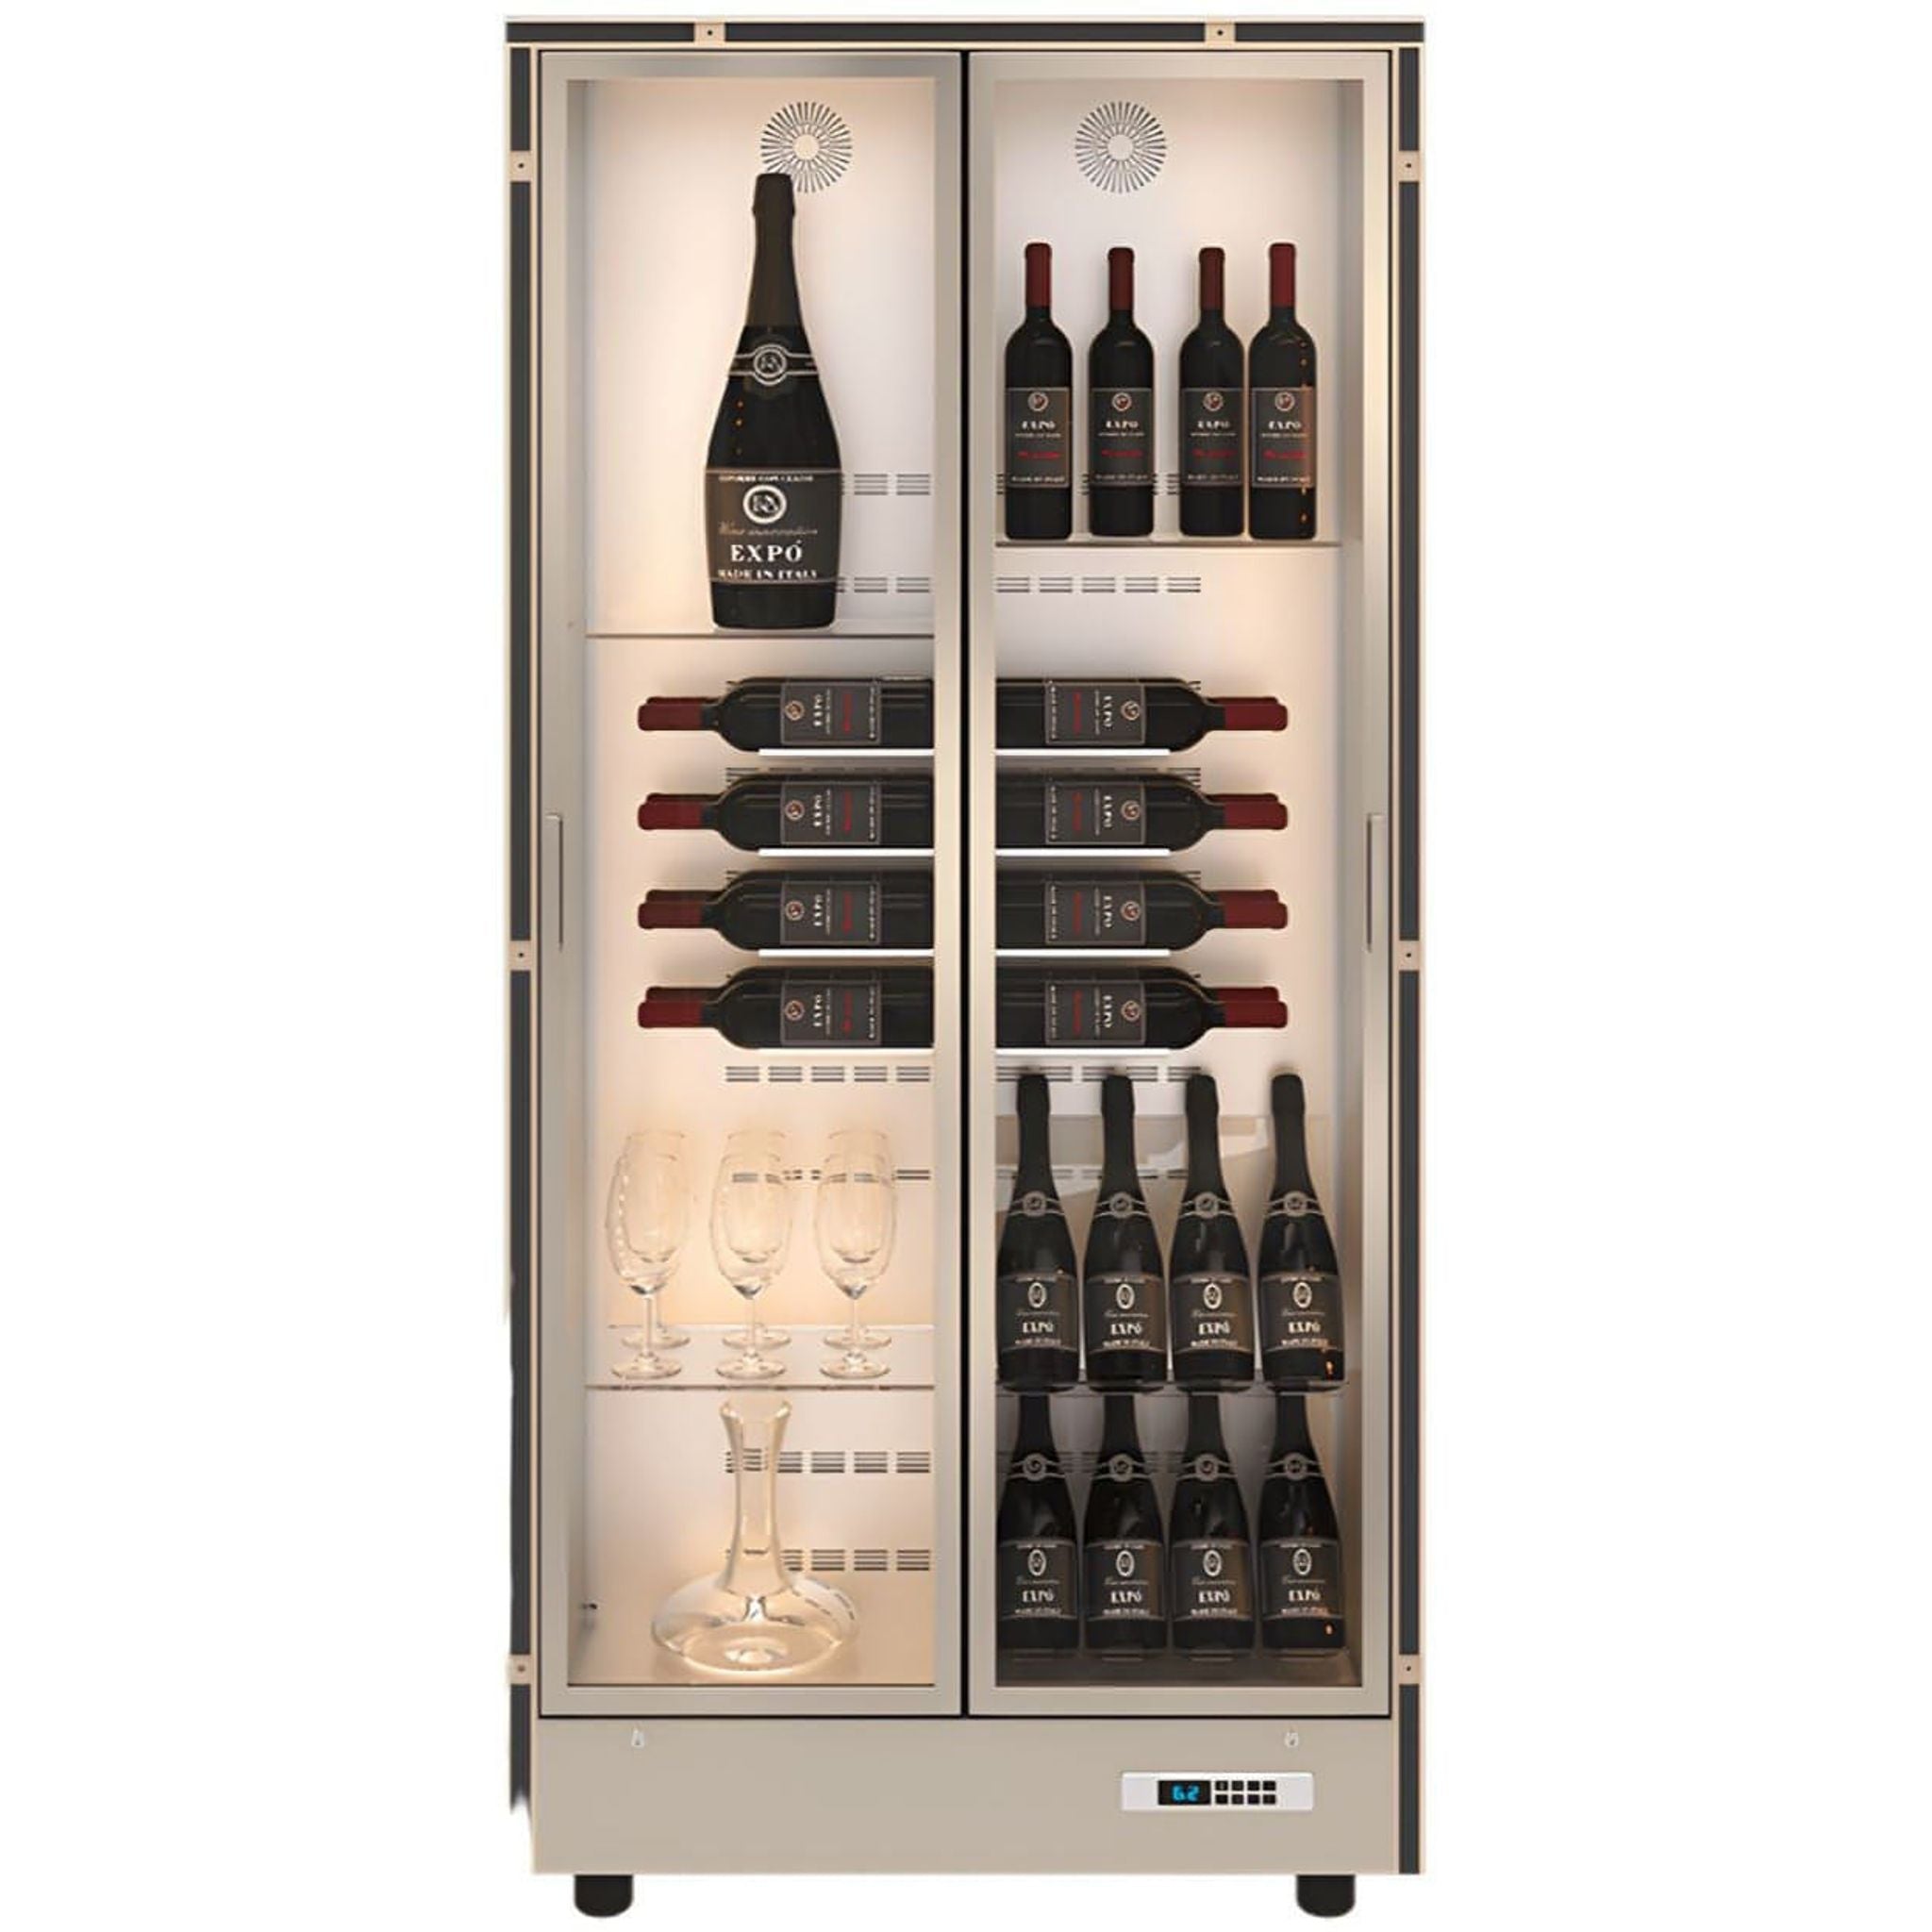 Mod 10 - Built in / Freestanding Wine Wall MD-14 - For Home Use